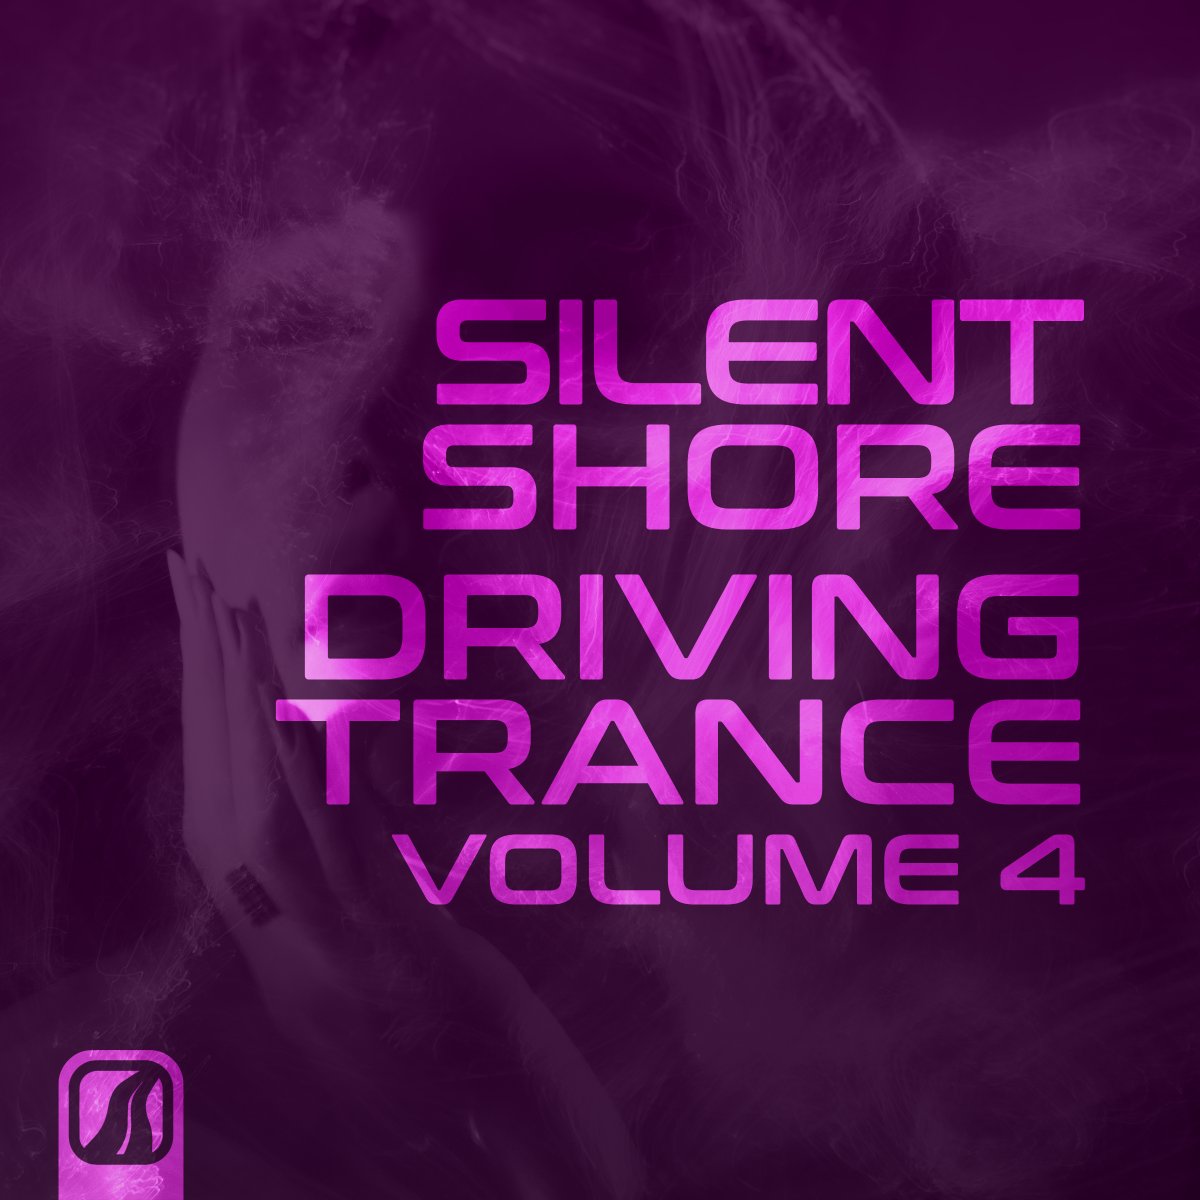 OUT NOW! Silent Shore - Driving Trance Vol. 4 Download/Stream: ffm.to/ssc050